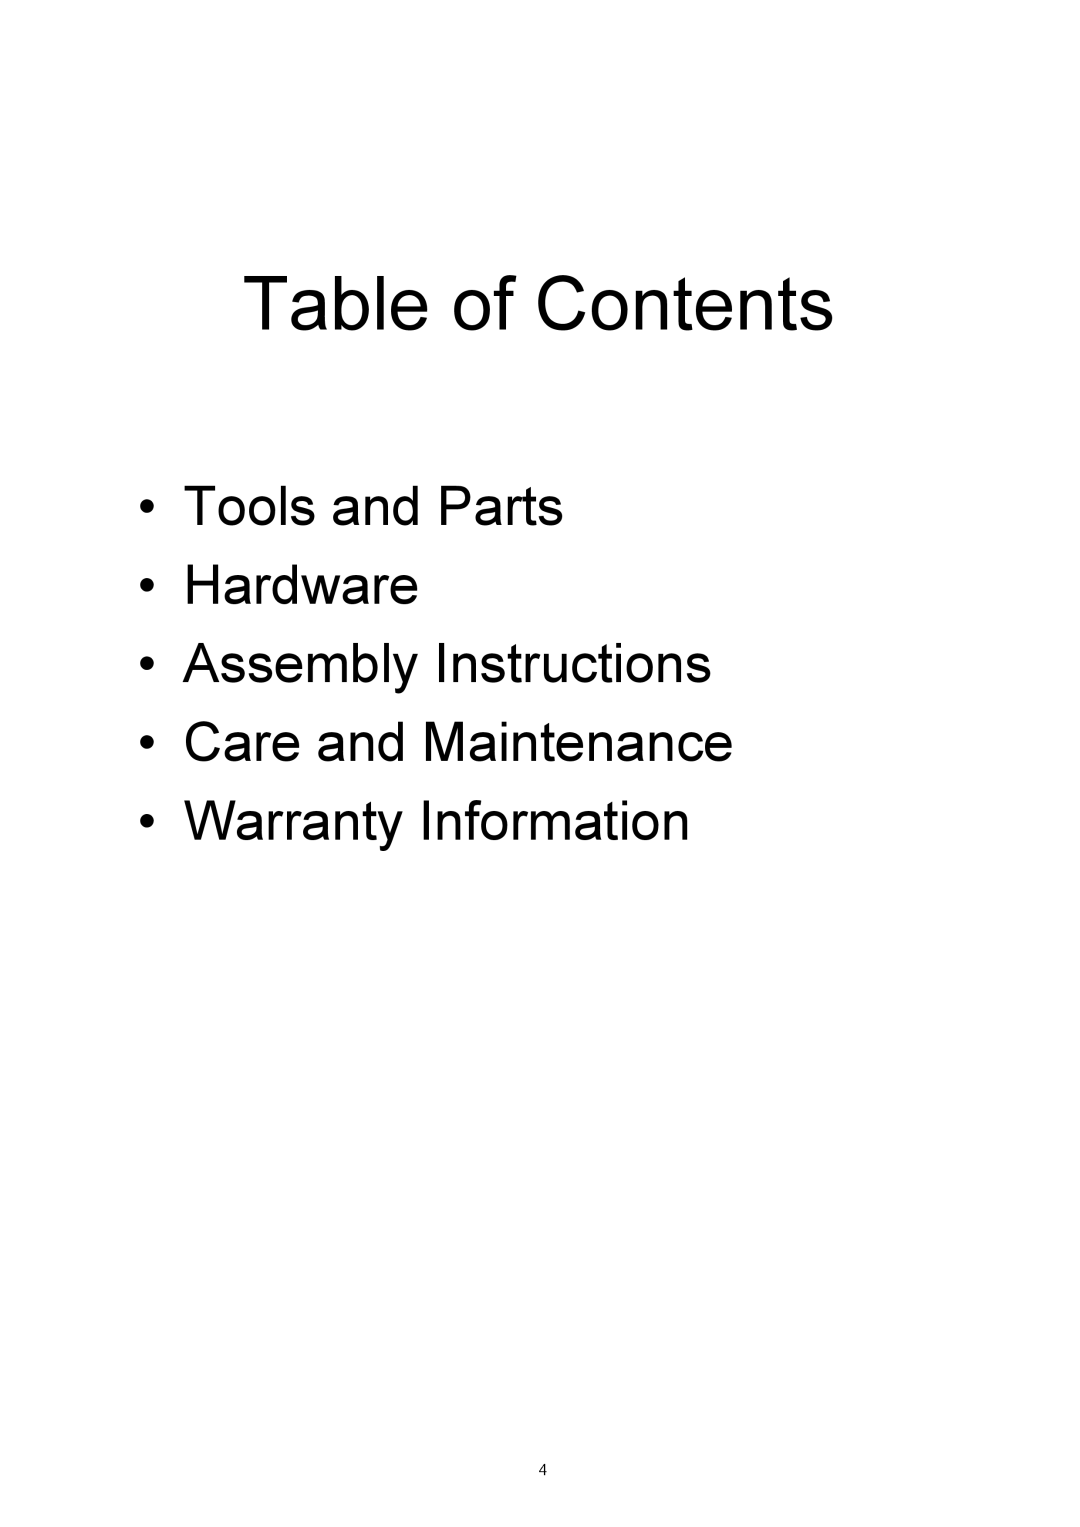 Outdoor Gourmet CG3023E Table of Contents, Tools and Parts Hardware Assembly Instructions Care and Maintenance 